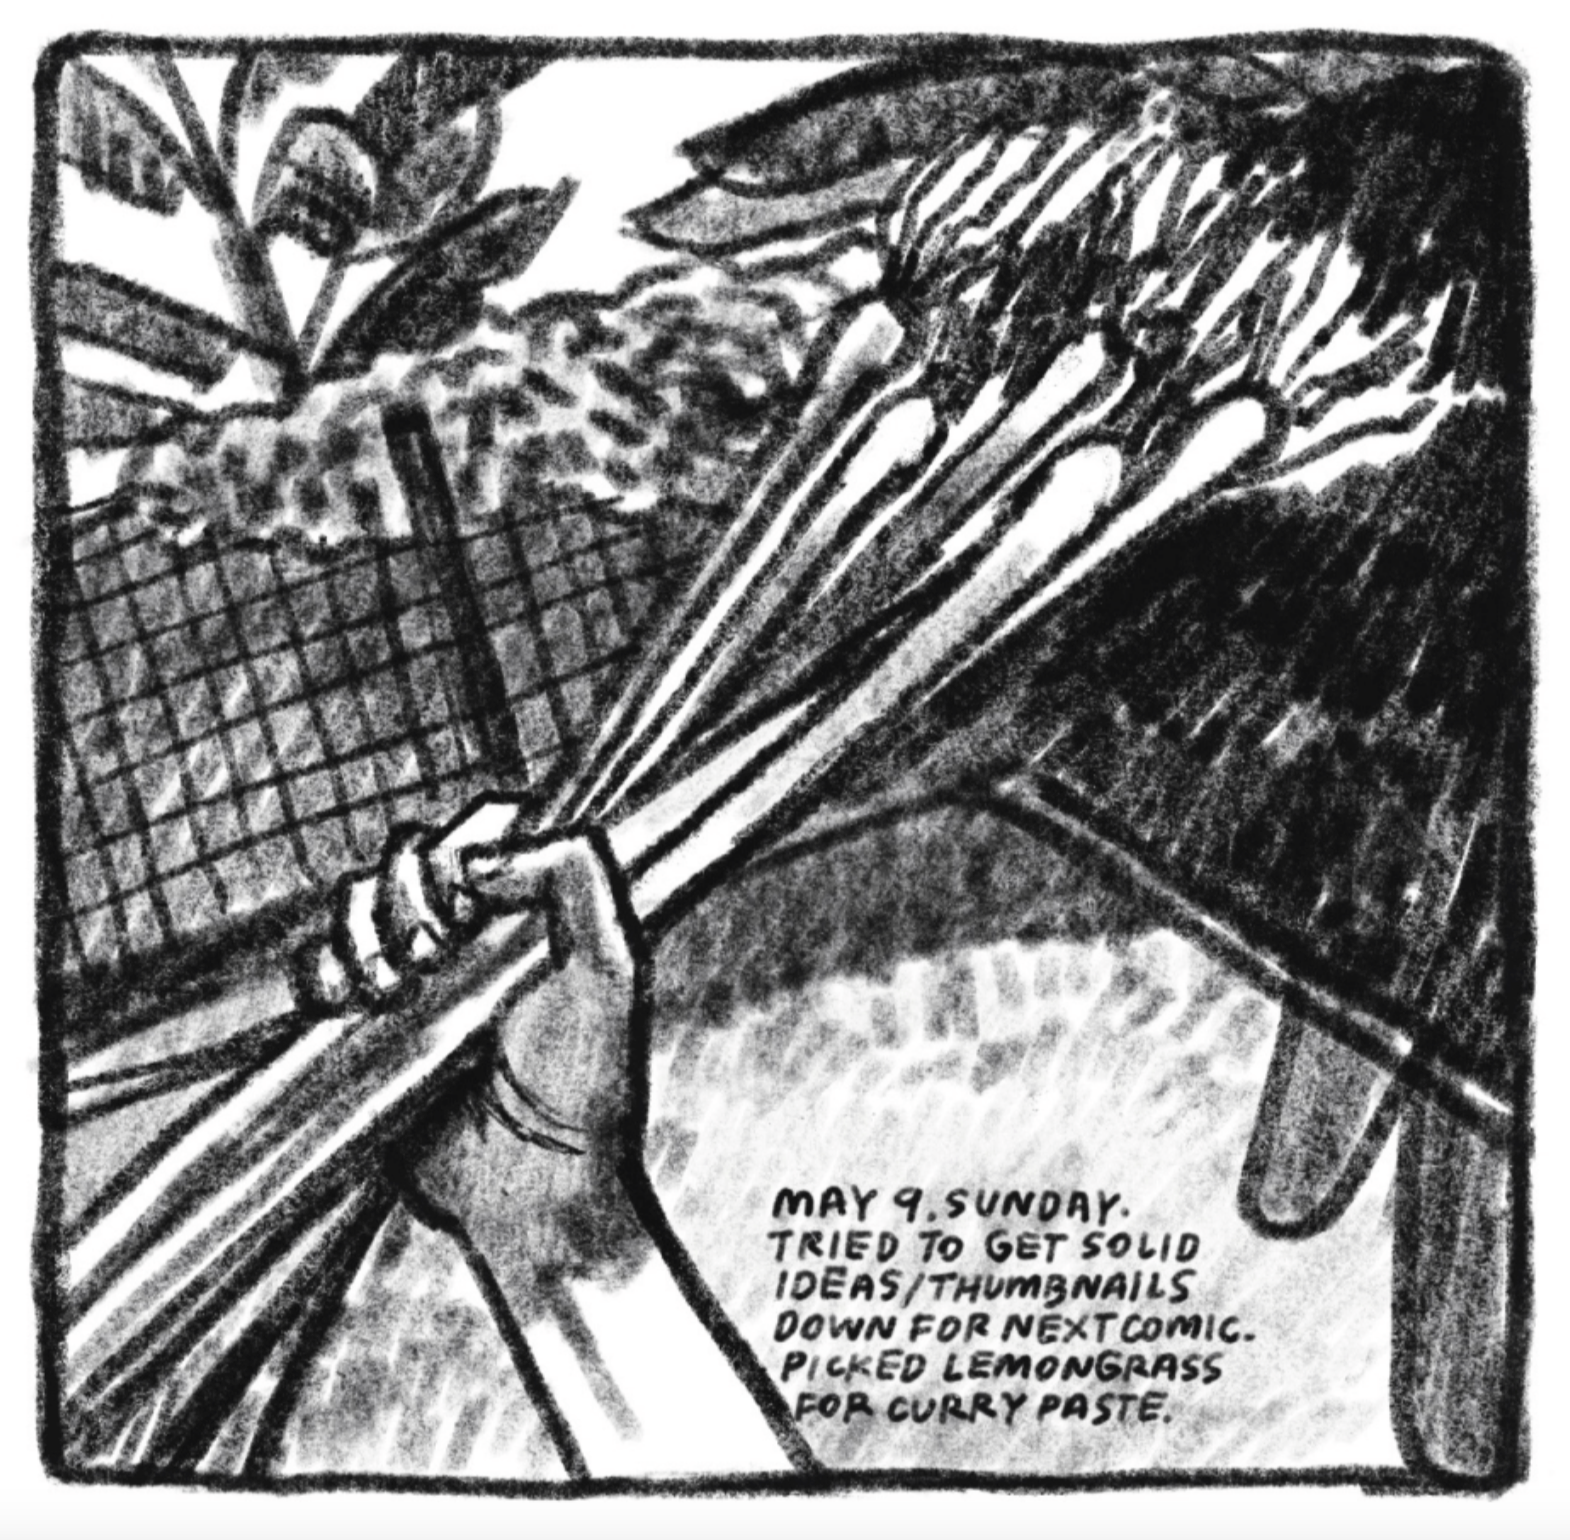 A hand firmly holds a bunch of lemongrass. There are trees and a fence in the background. 
"May 9. Sunday. Tried to get solid ideas/thumbnails down for next comic. Picked lemongrass for curry paste."